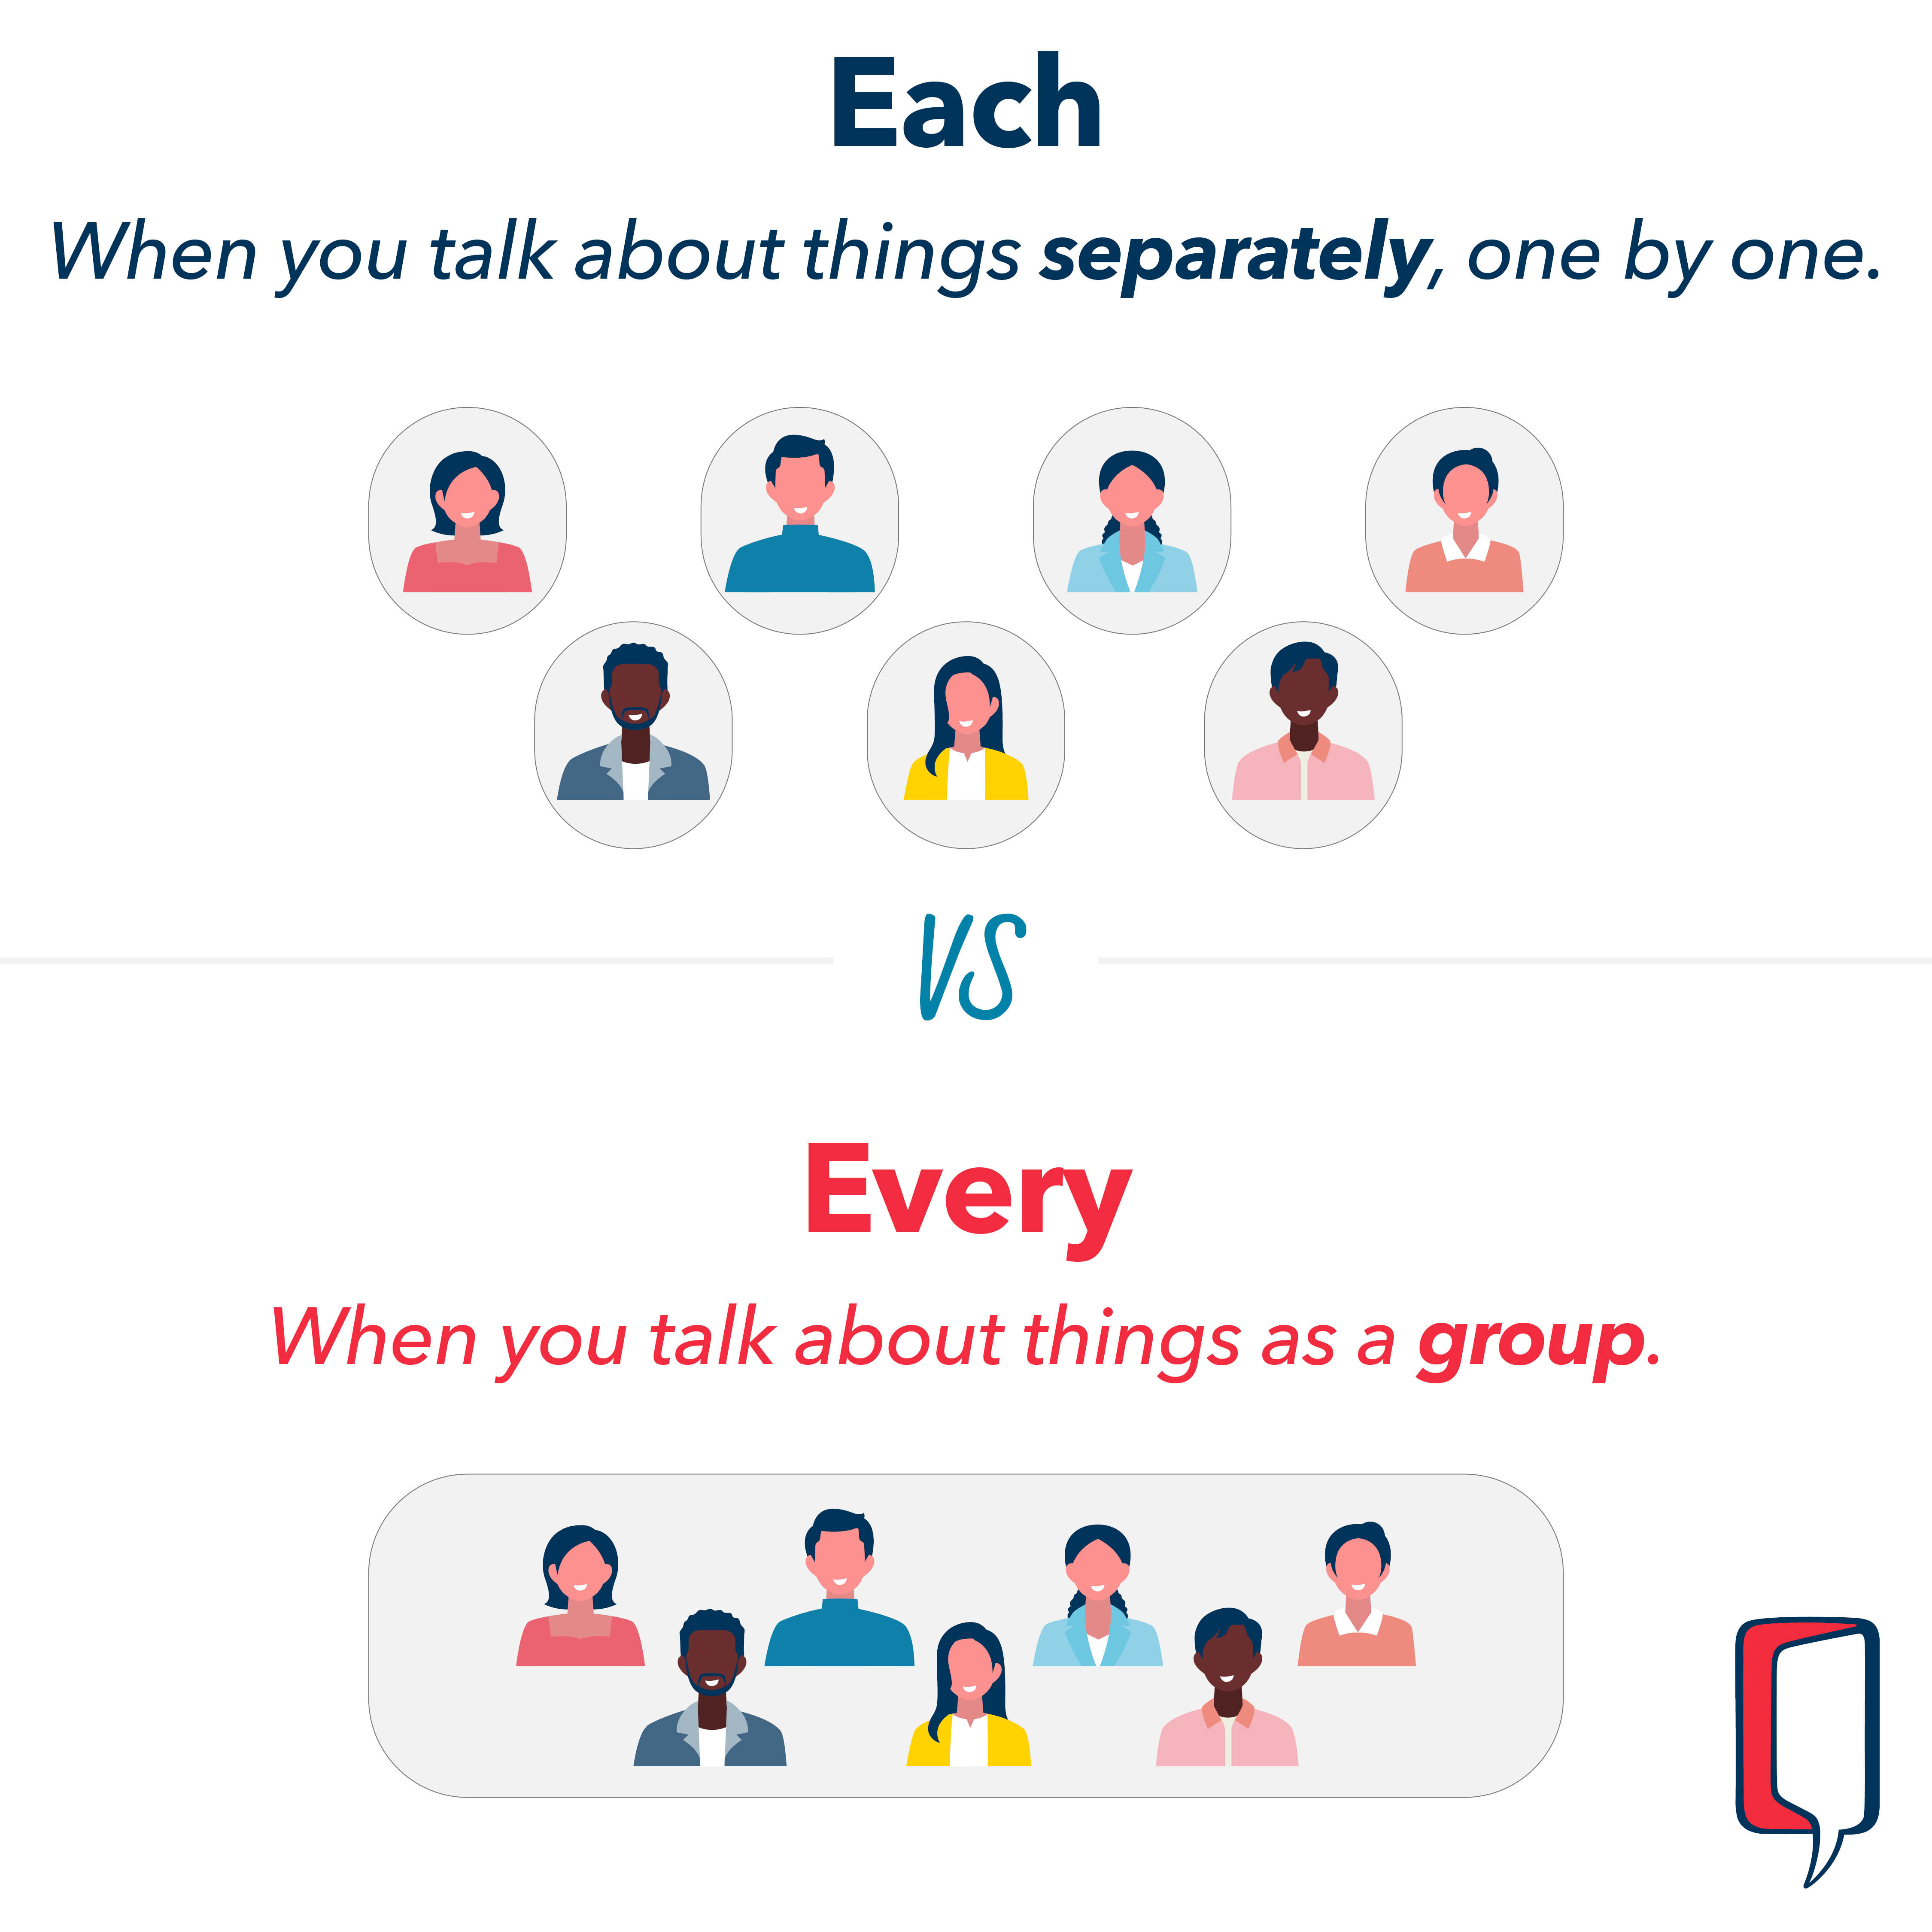 Each : when you talk about things separately, one by one | Every : when you talk about things as a group